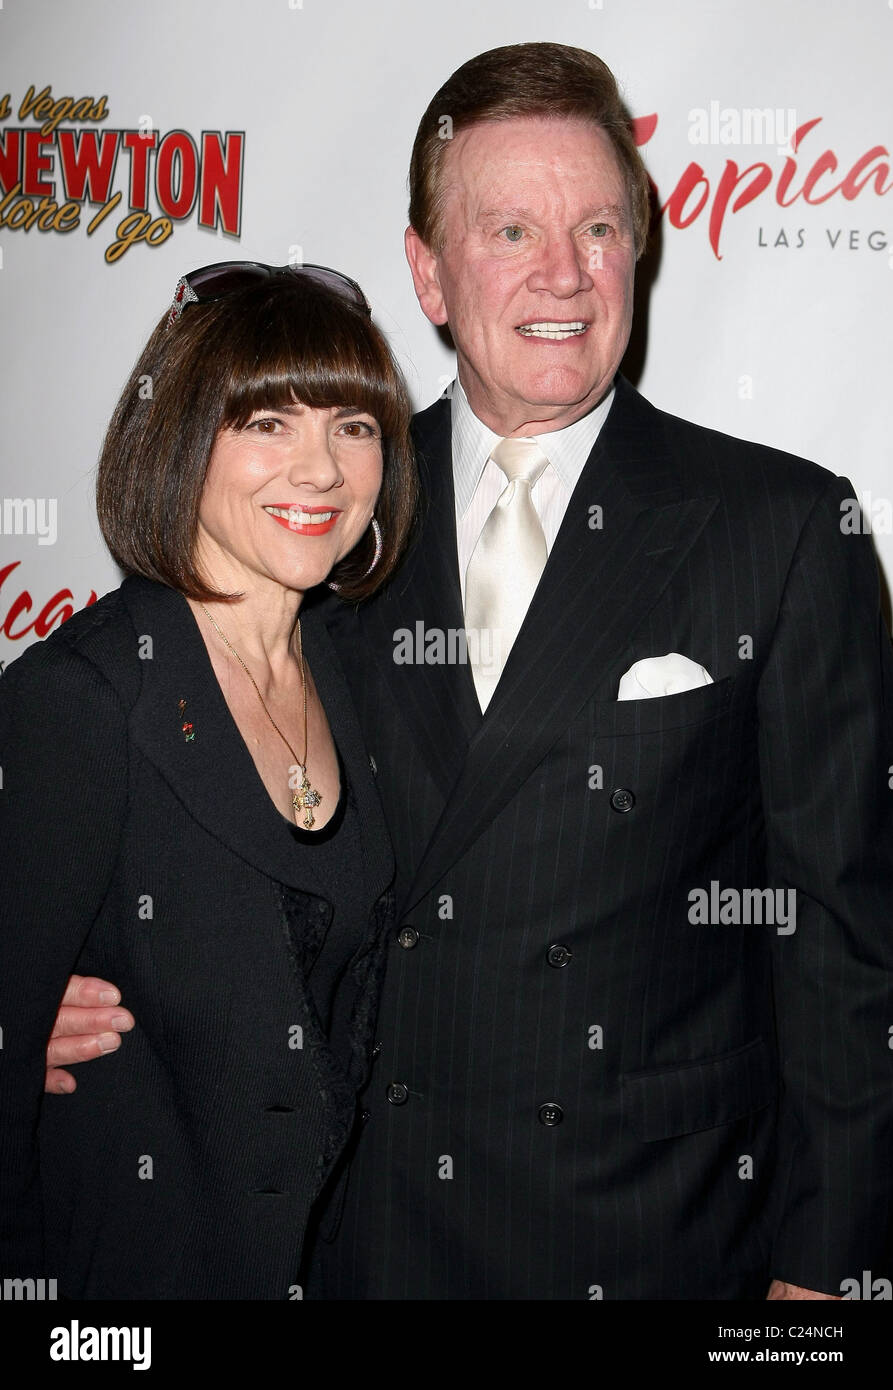 Wink Martindale and Wife Sandy Mr Las Vegas, Wayne Newton's new show 'Once Before I Go' premiere at the Tropicana hotel and Stock Photo